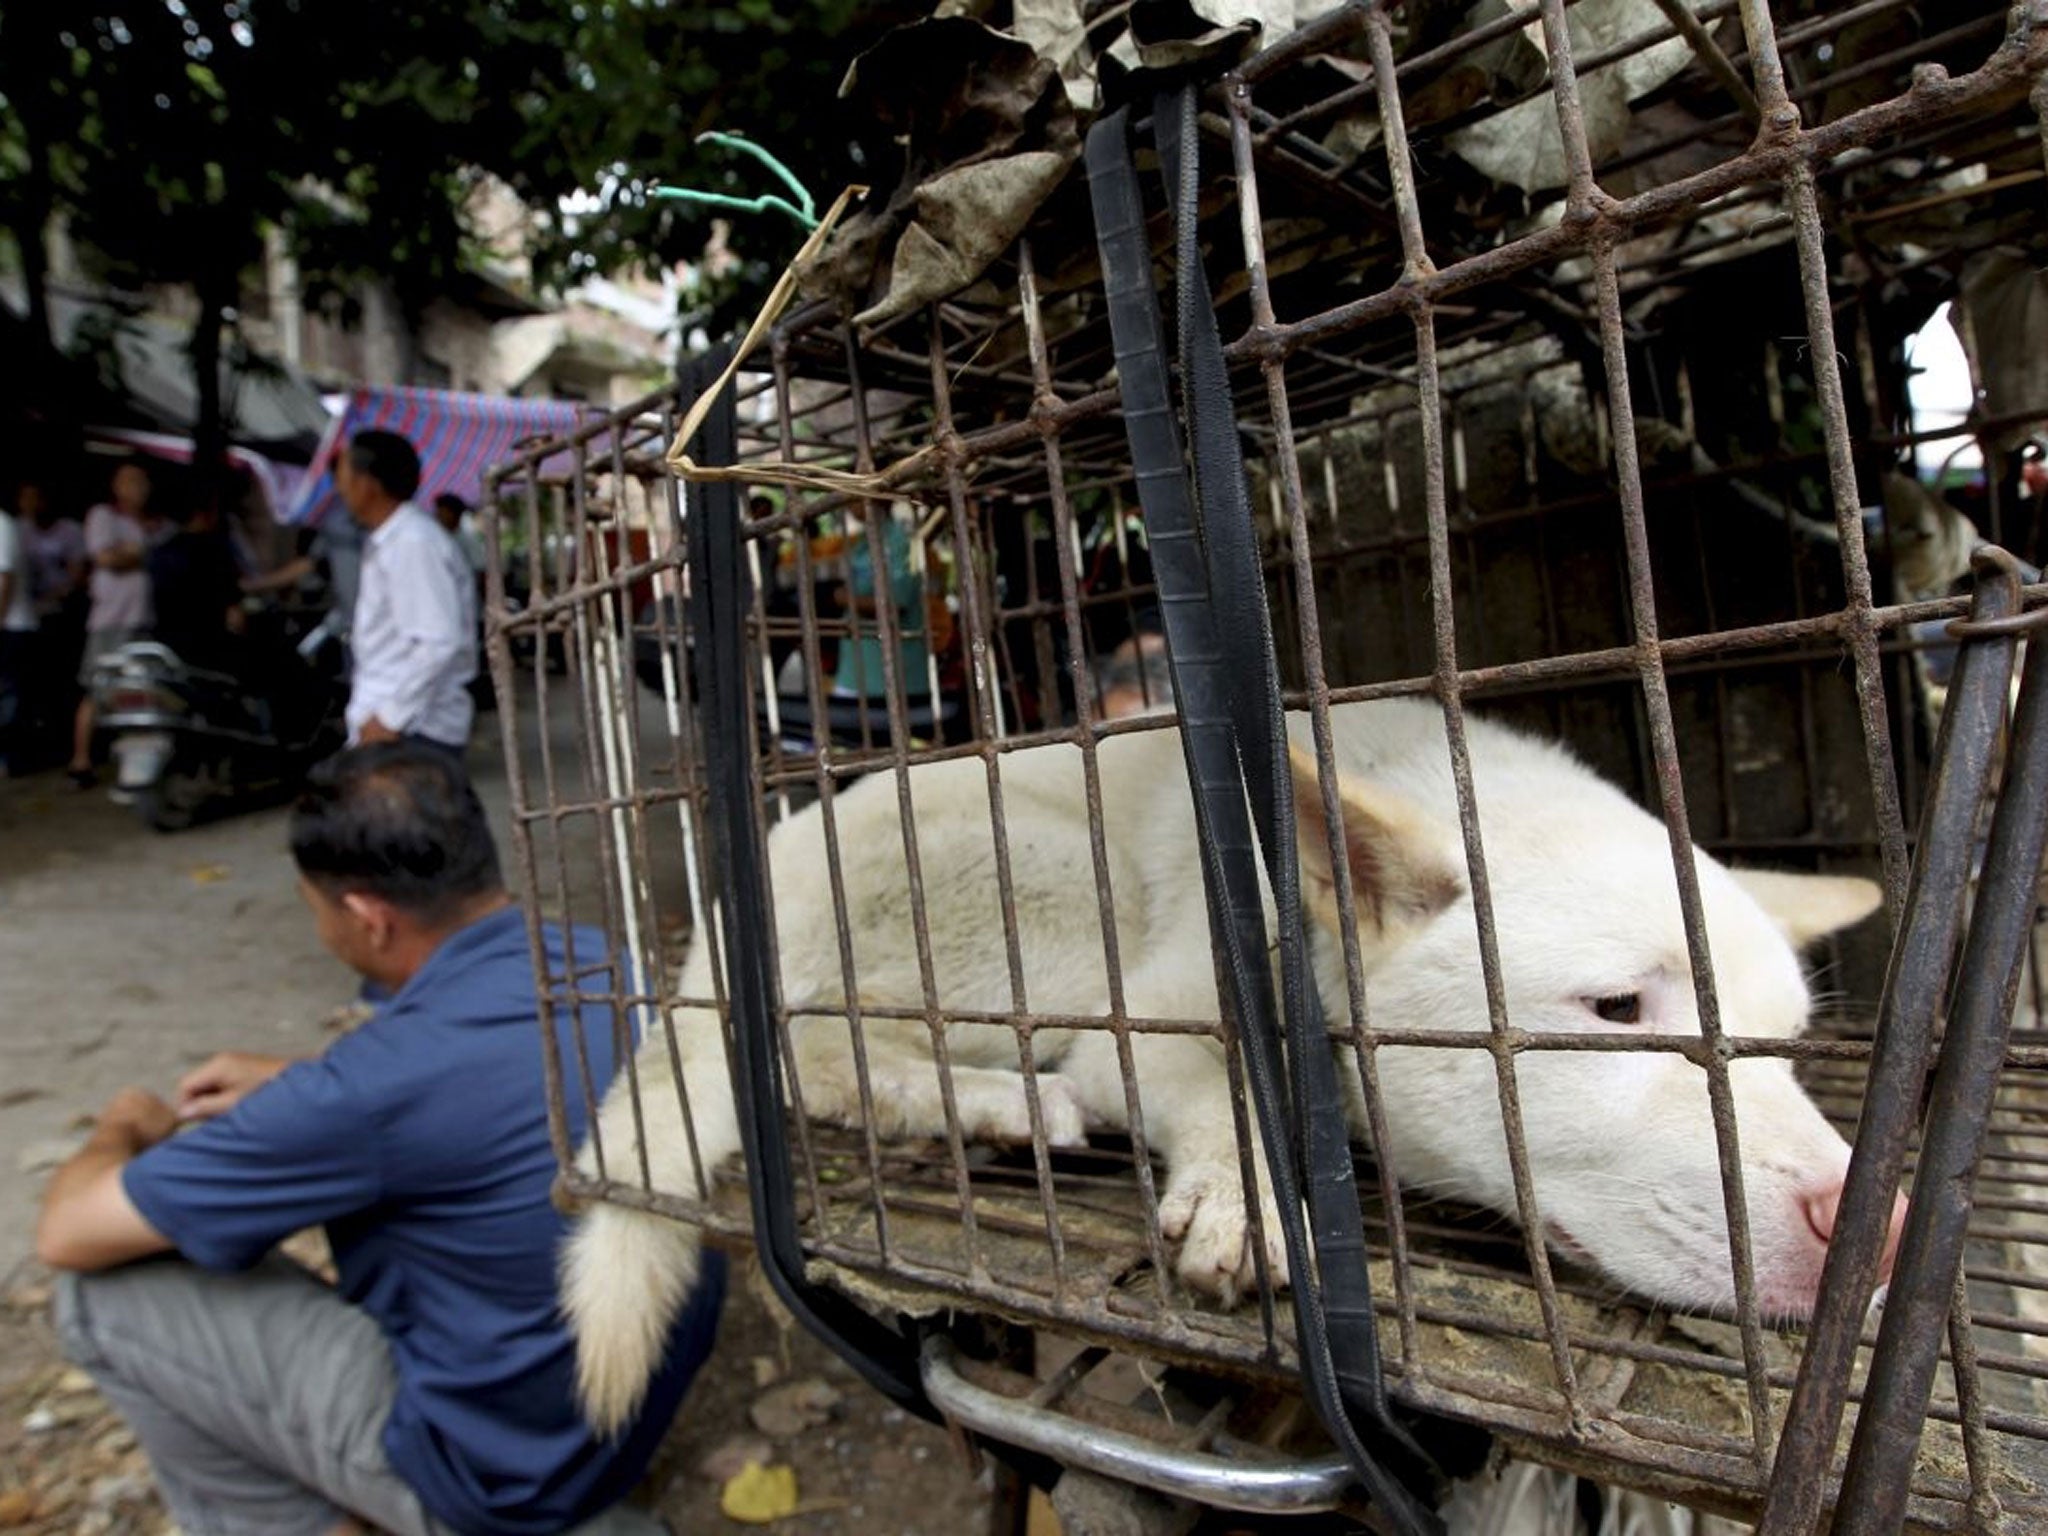 A dog waits to be sold for meat in a market in Yulin